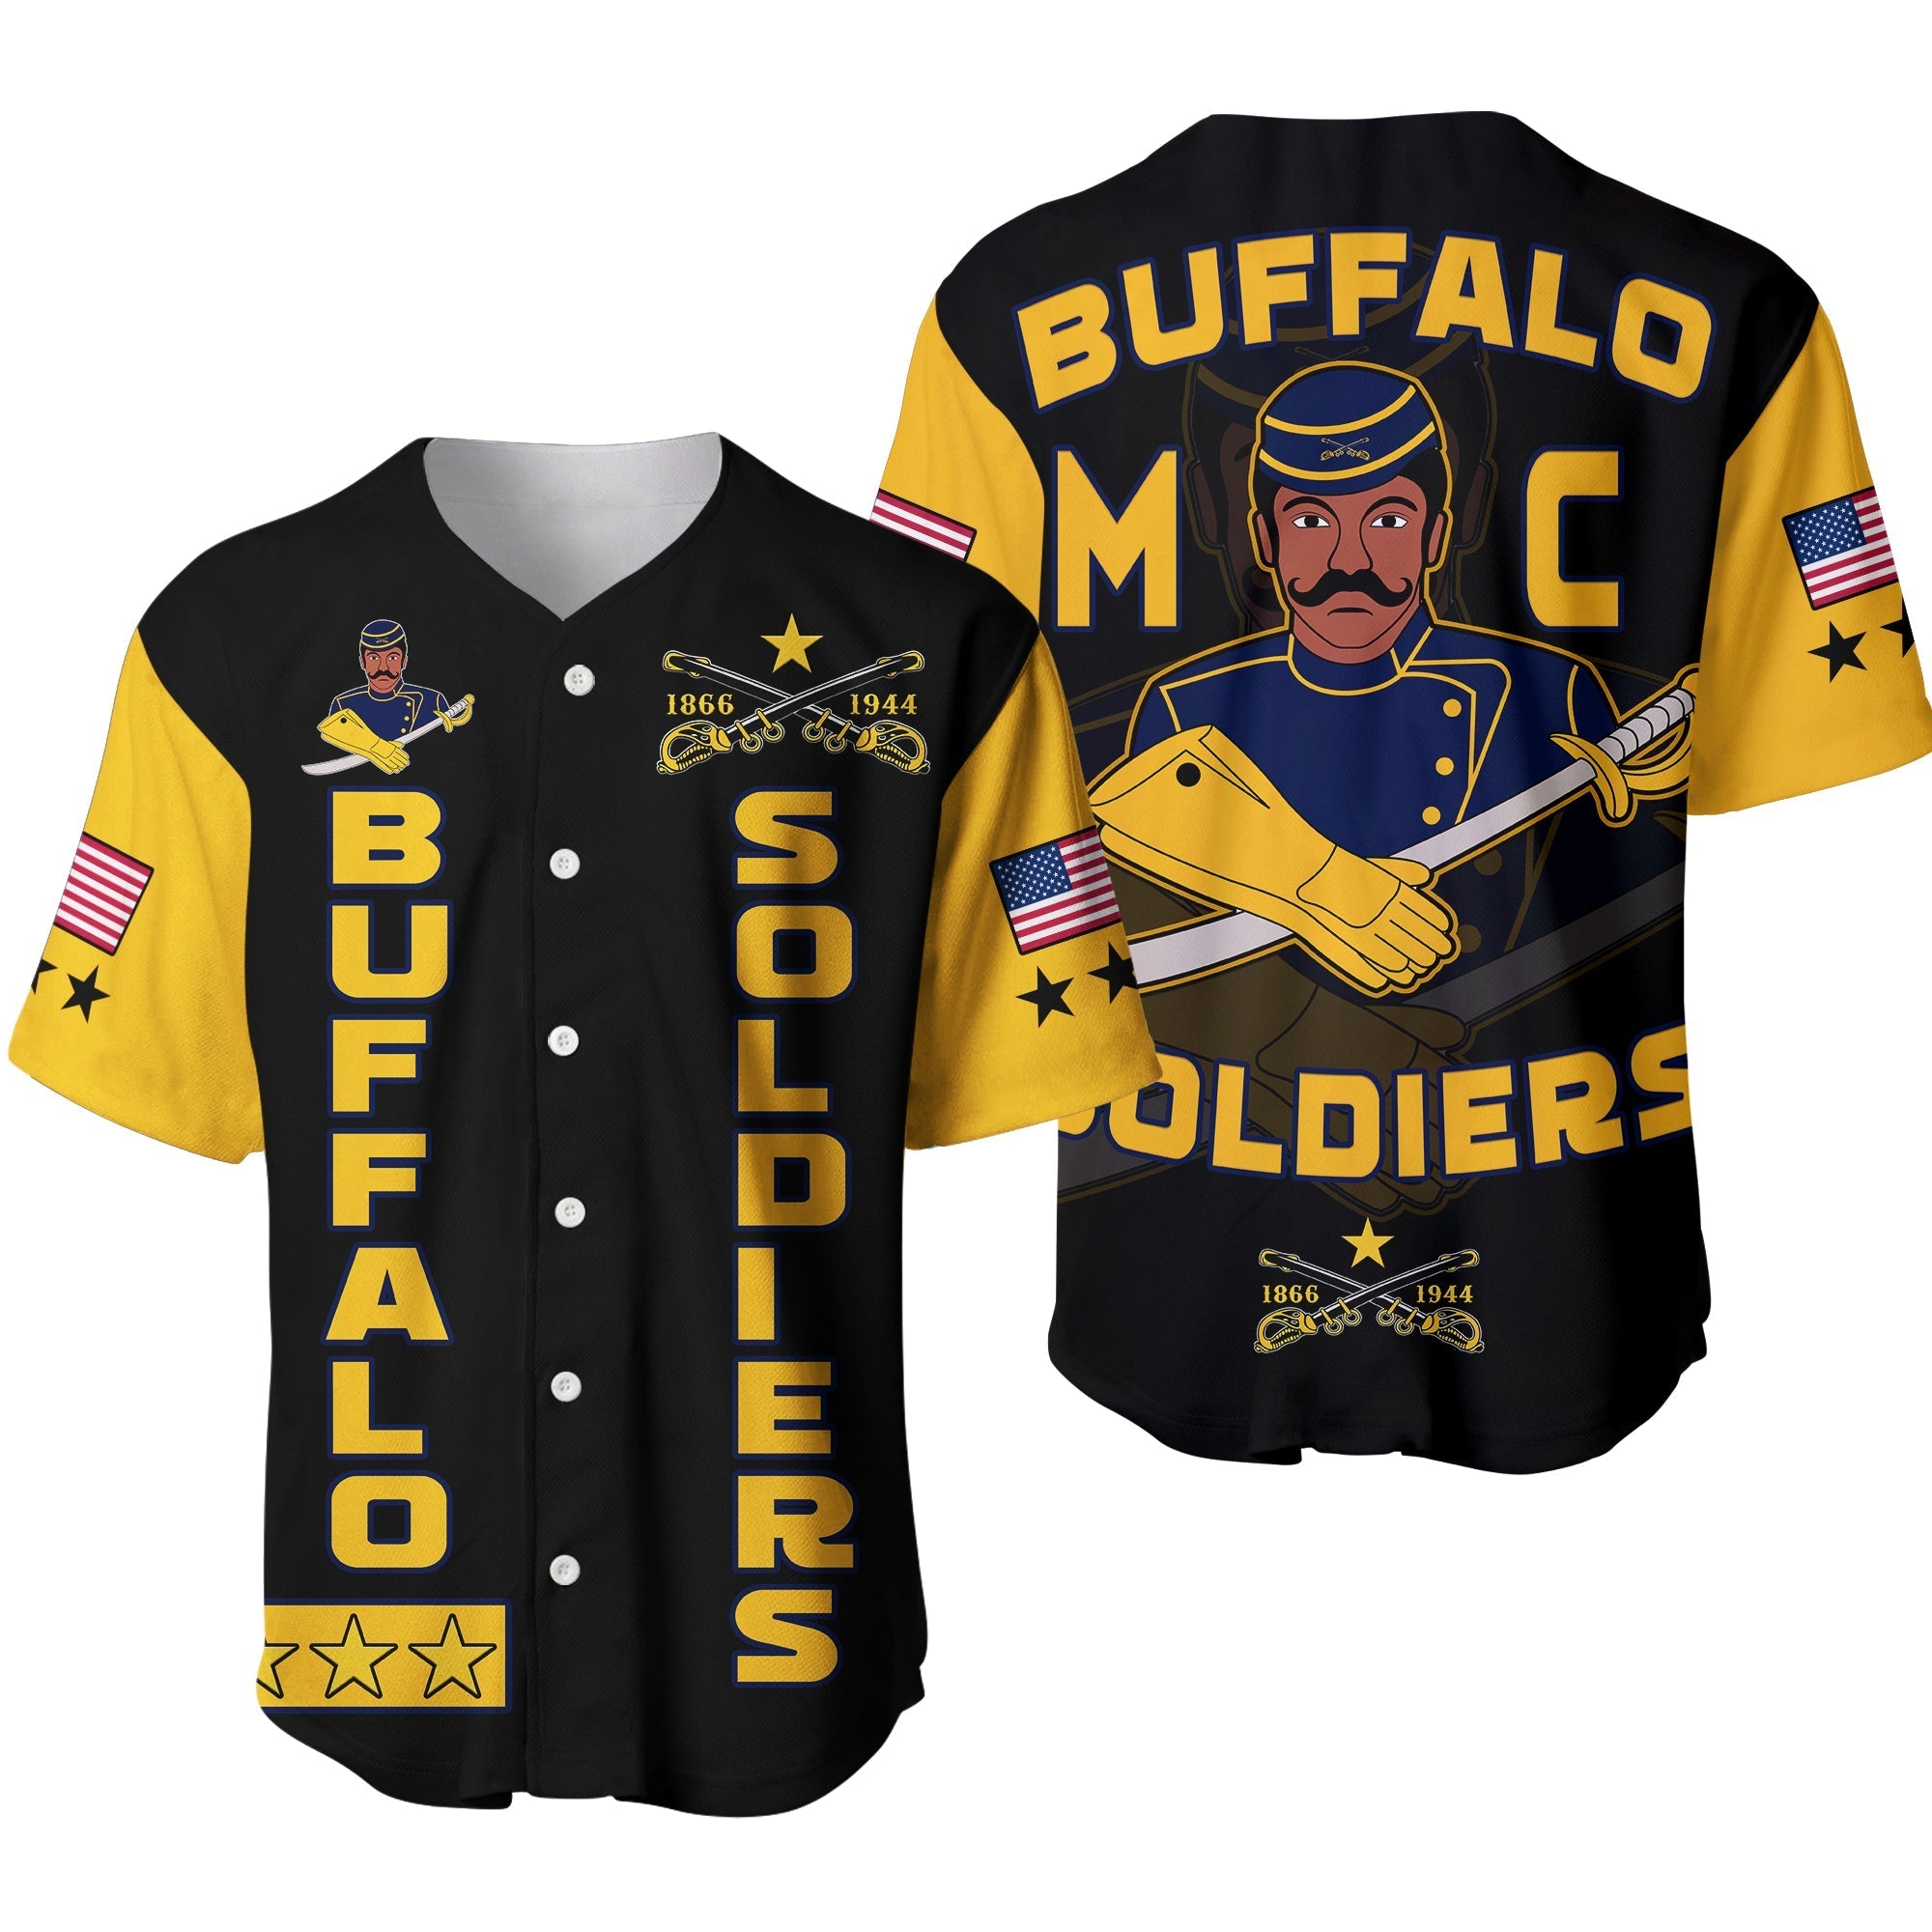 buffalo-soldiers-baseball-jersey-bsmc-club-adore-motorcycle-ver01